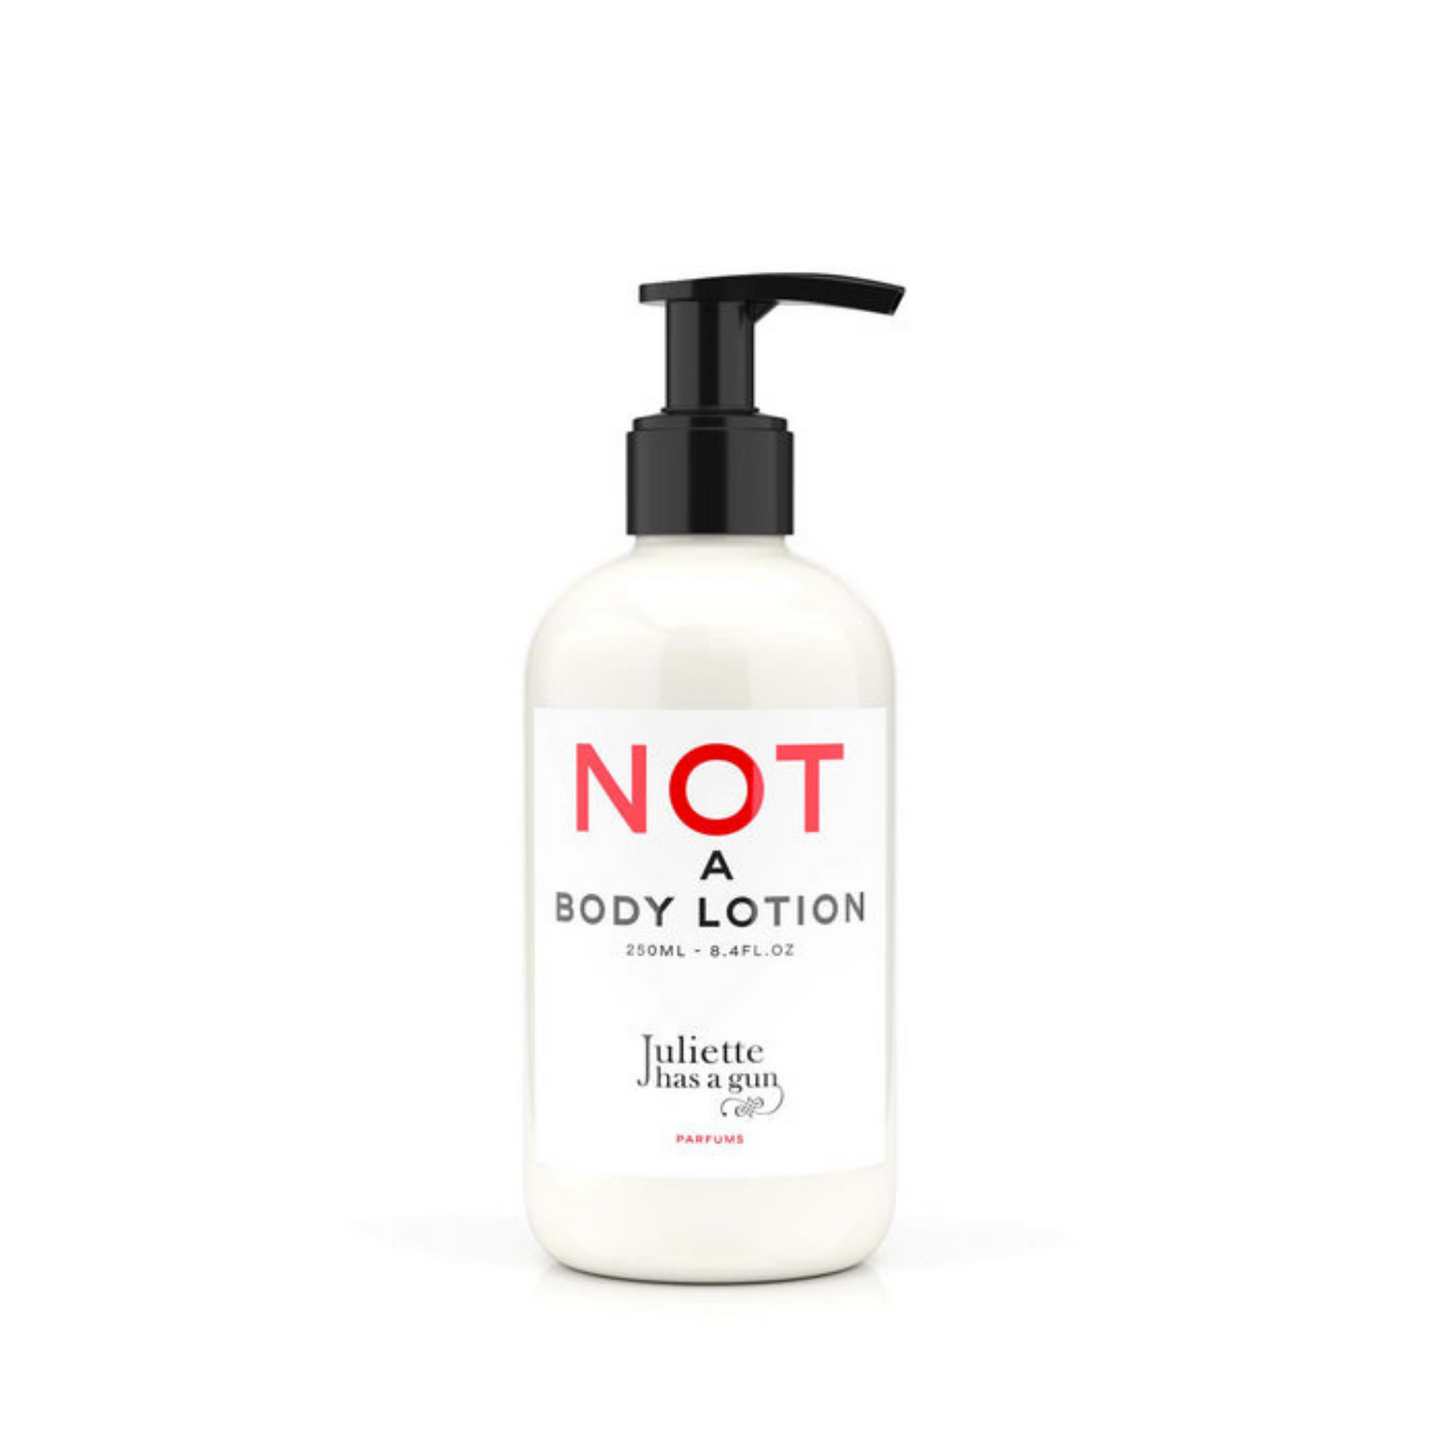 Primary Image of Not a Body Lotion